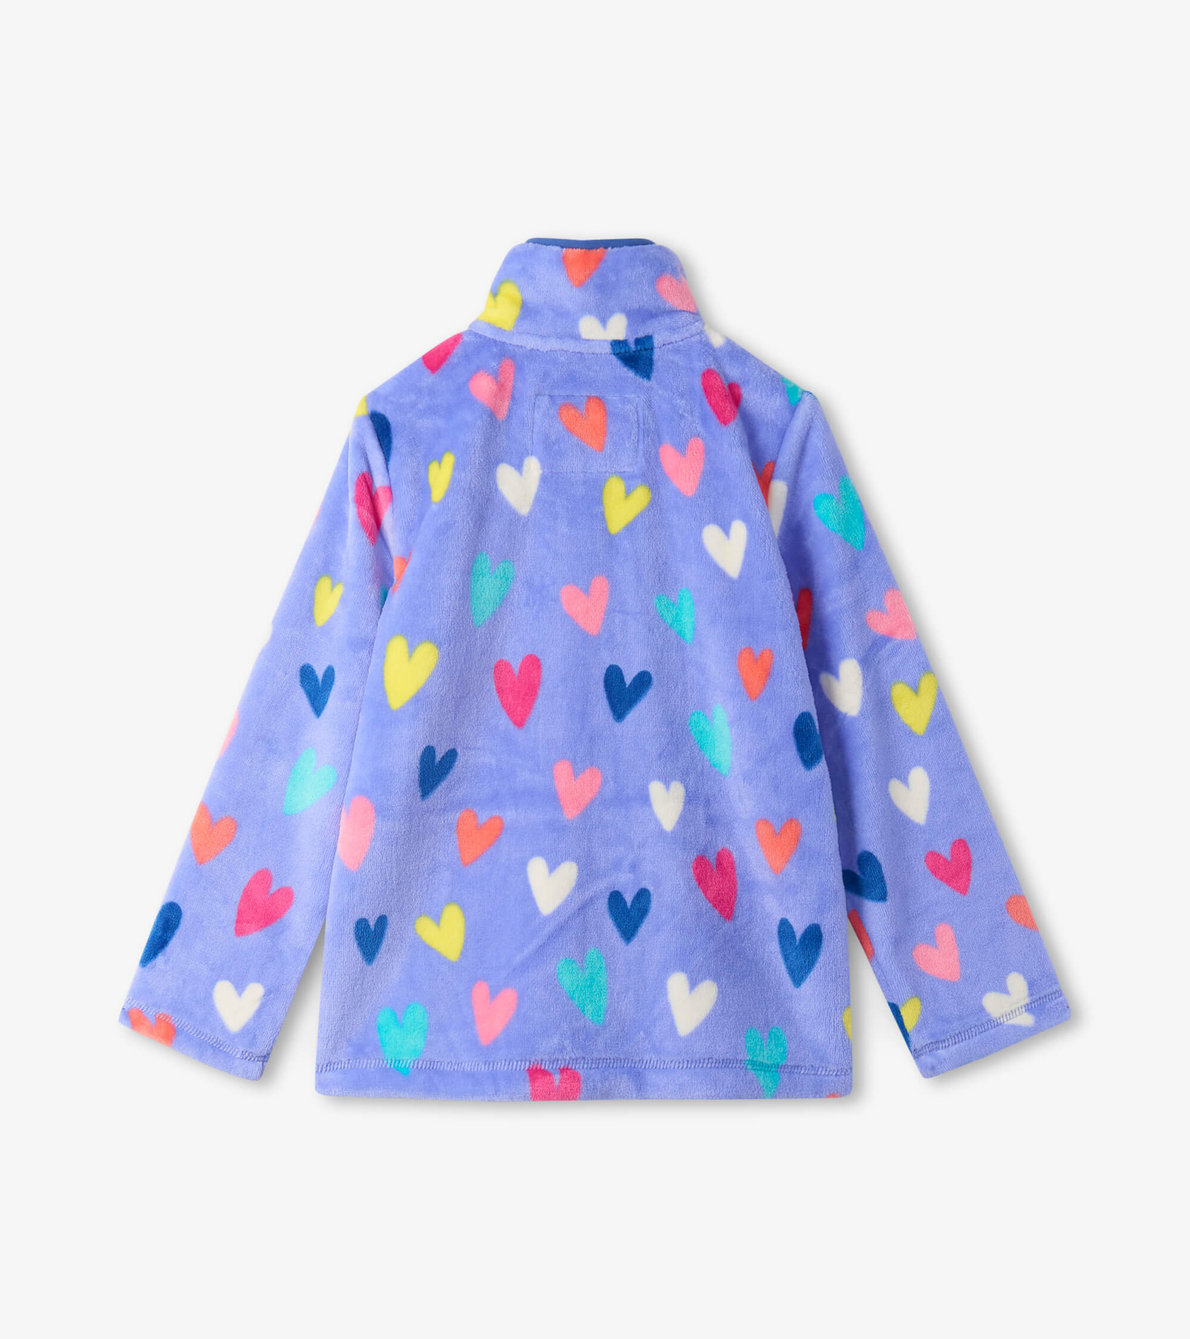 View larger image of Confetti Hearts Fuzzy Fleece Zip Up